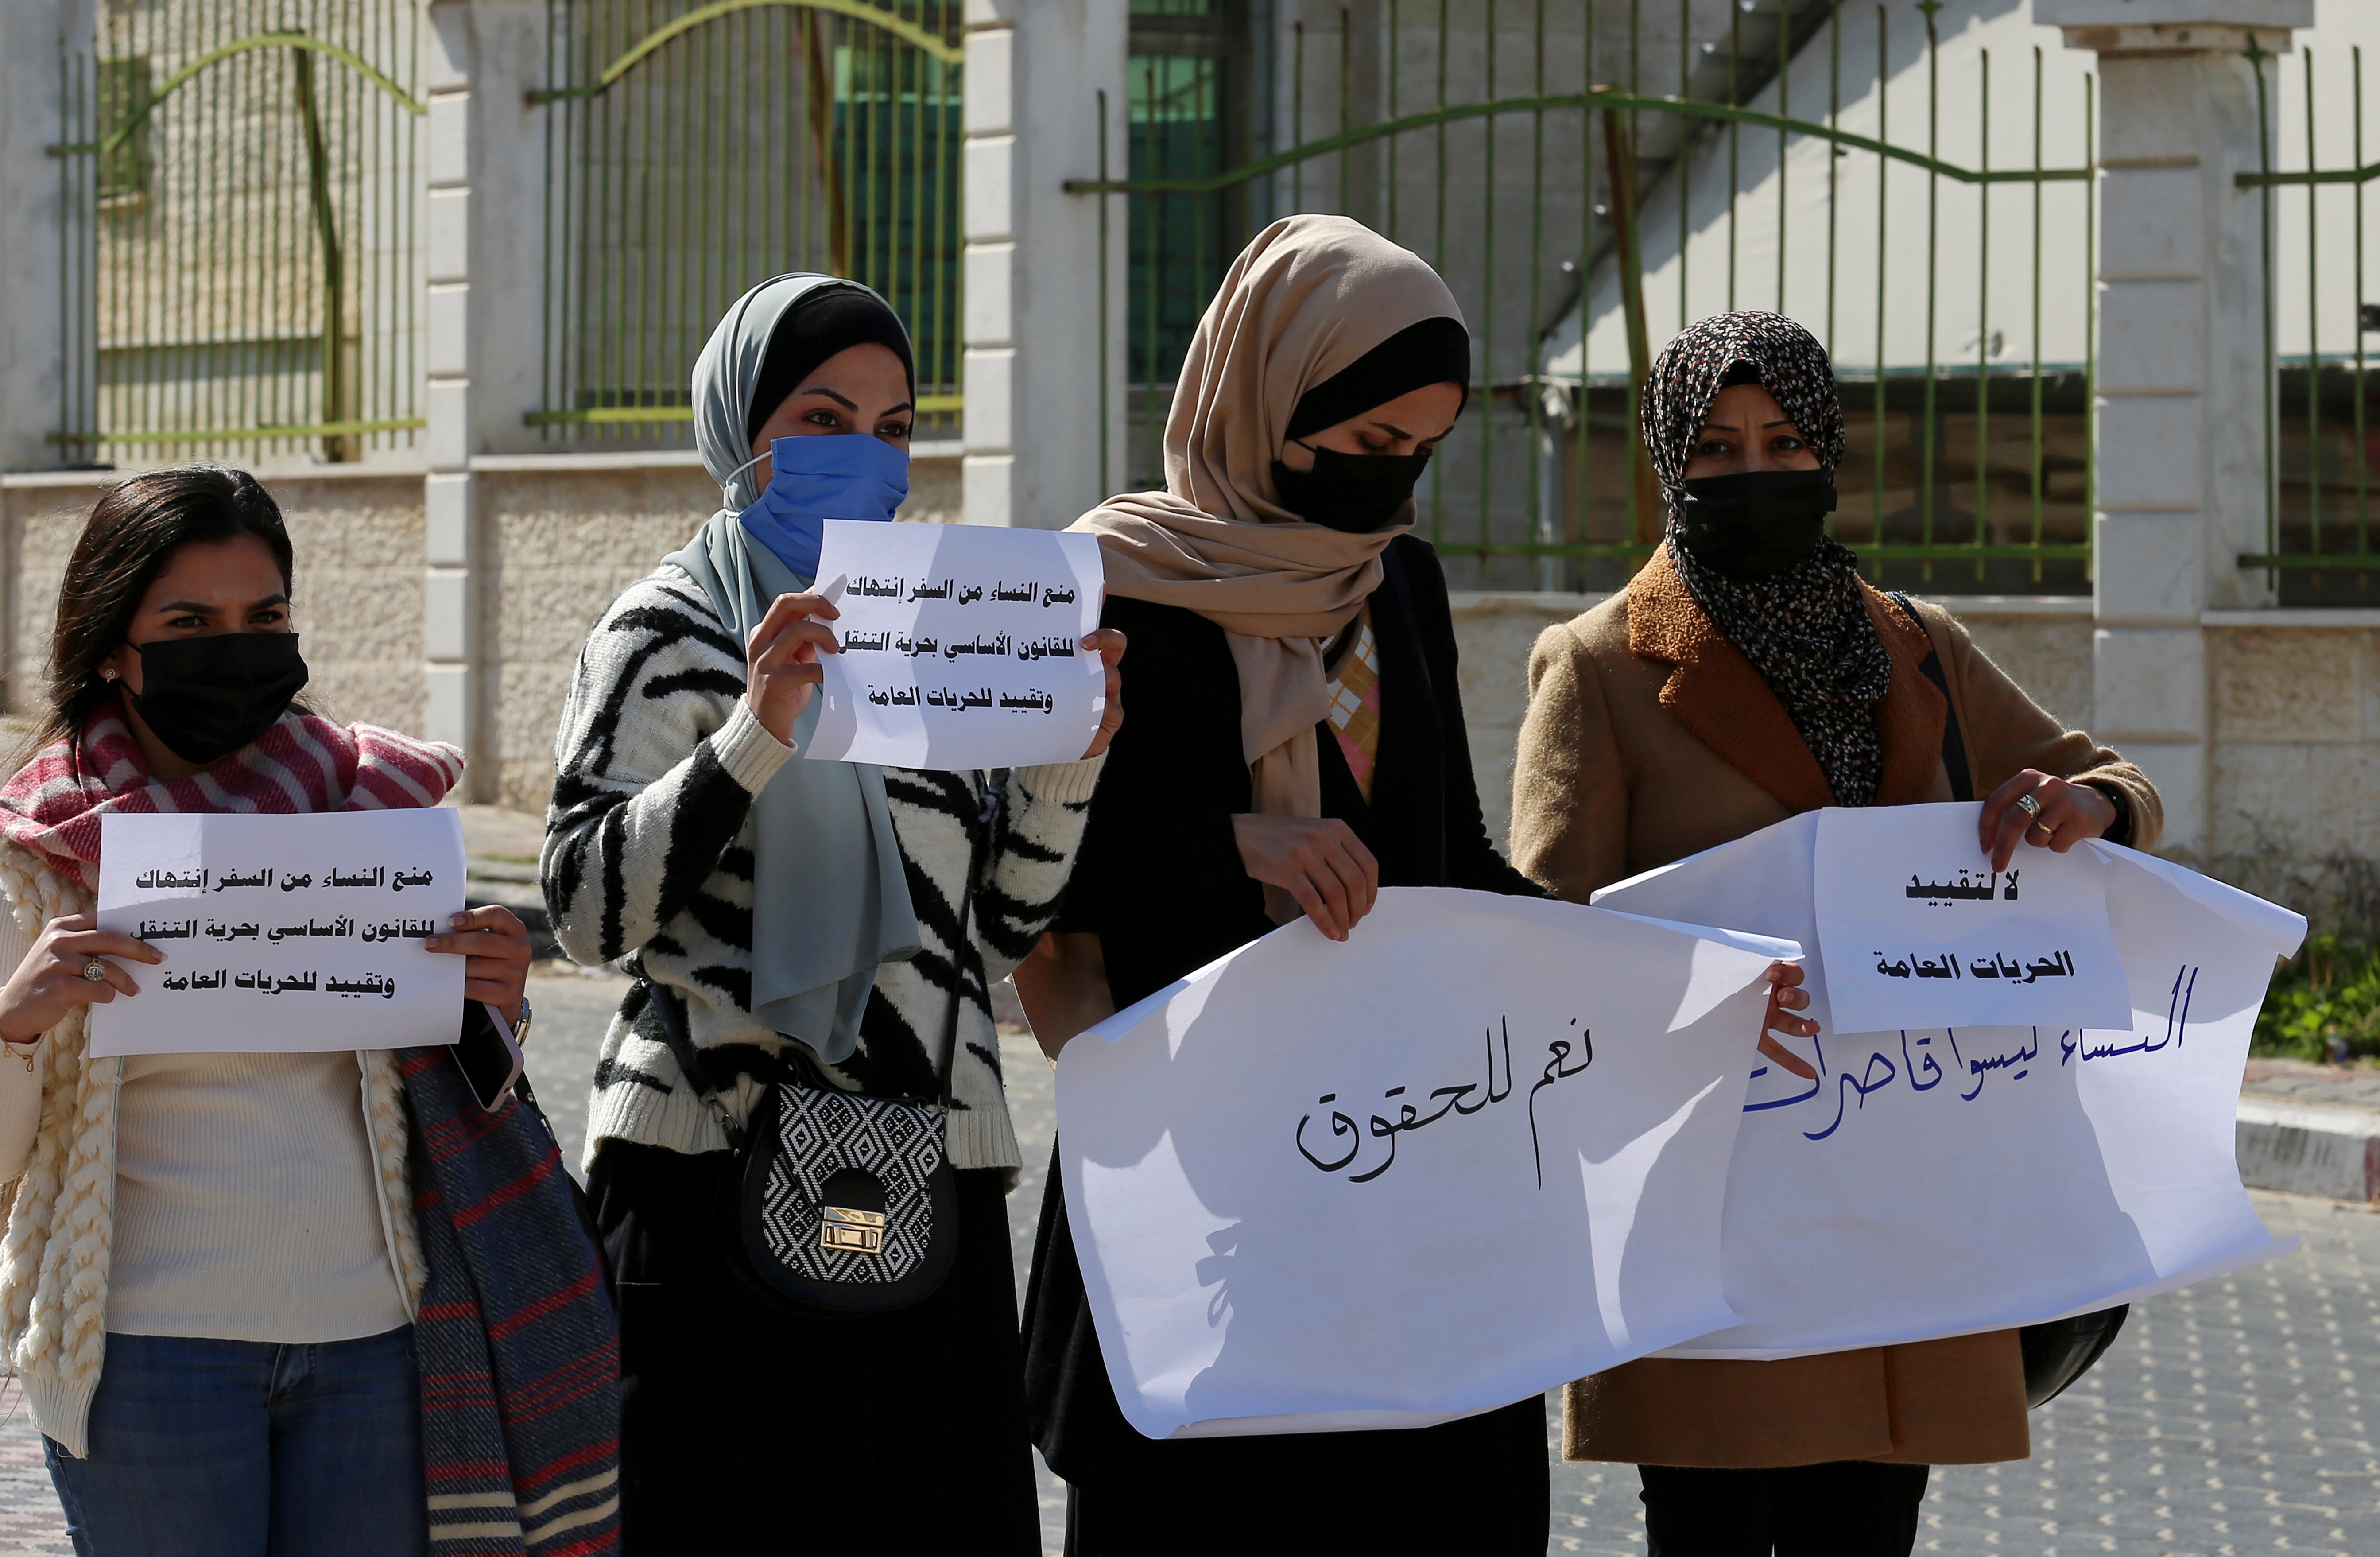 Women hold signs during a protest against the decision by the Sharia Judicial Council banning women from movement in and out of the Gaza Strip without the permission of her “guardian"